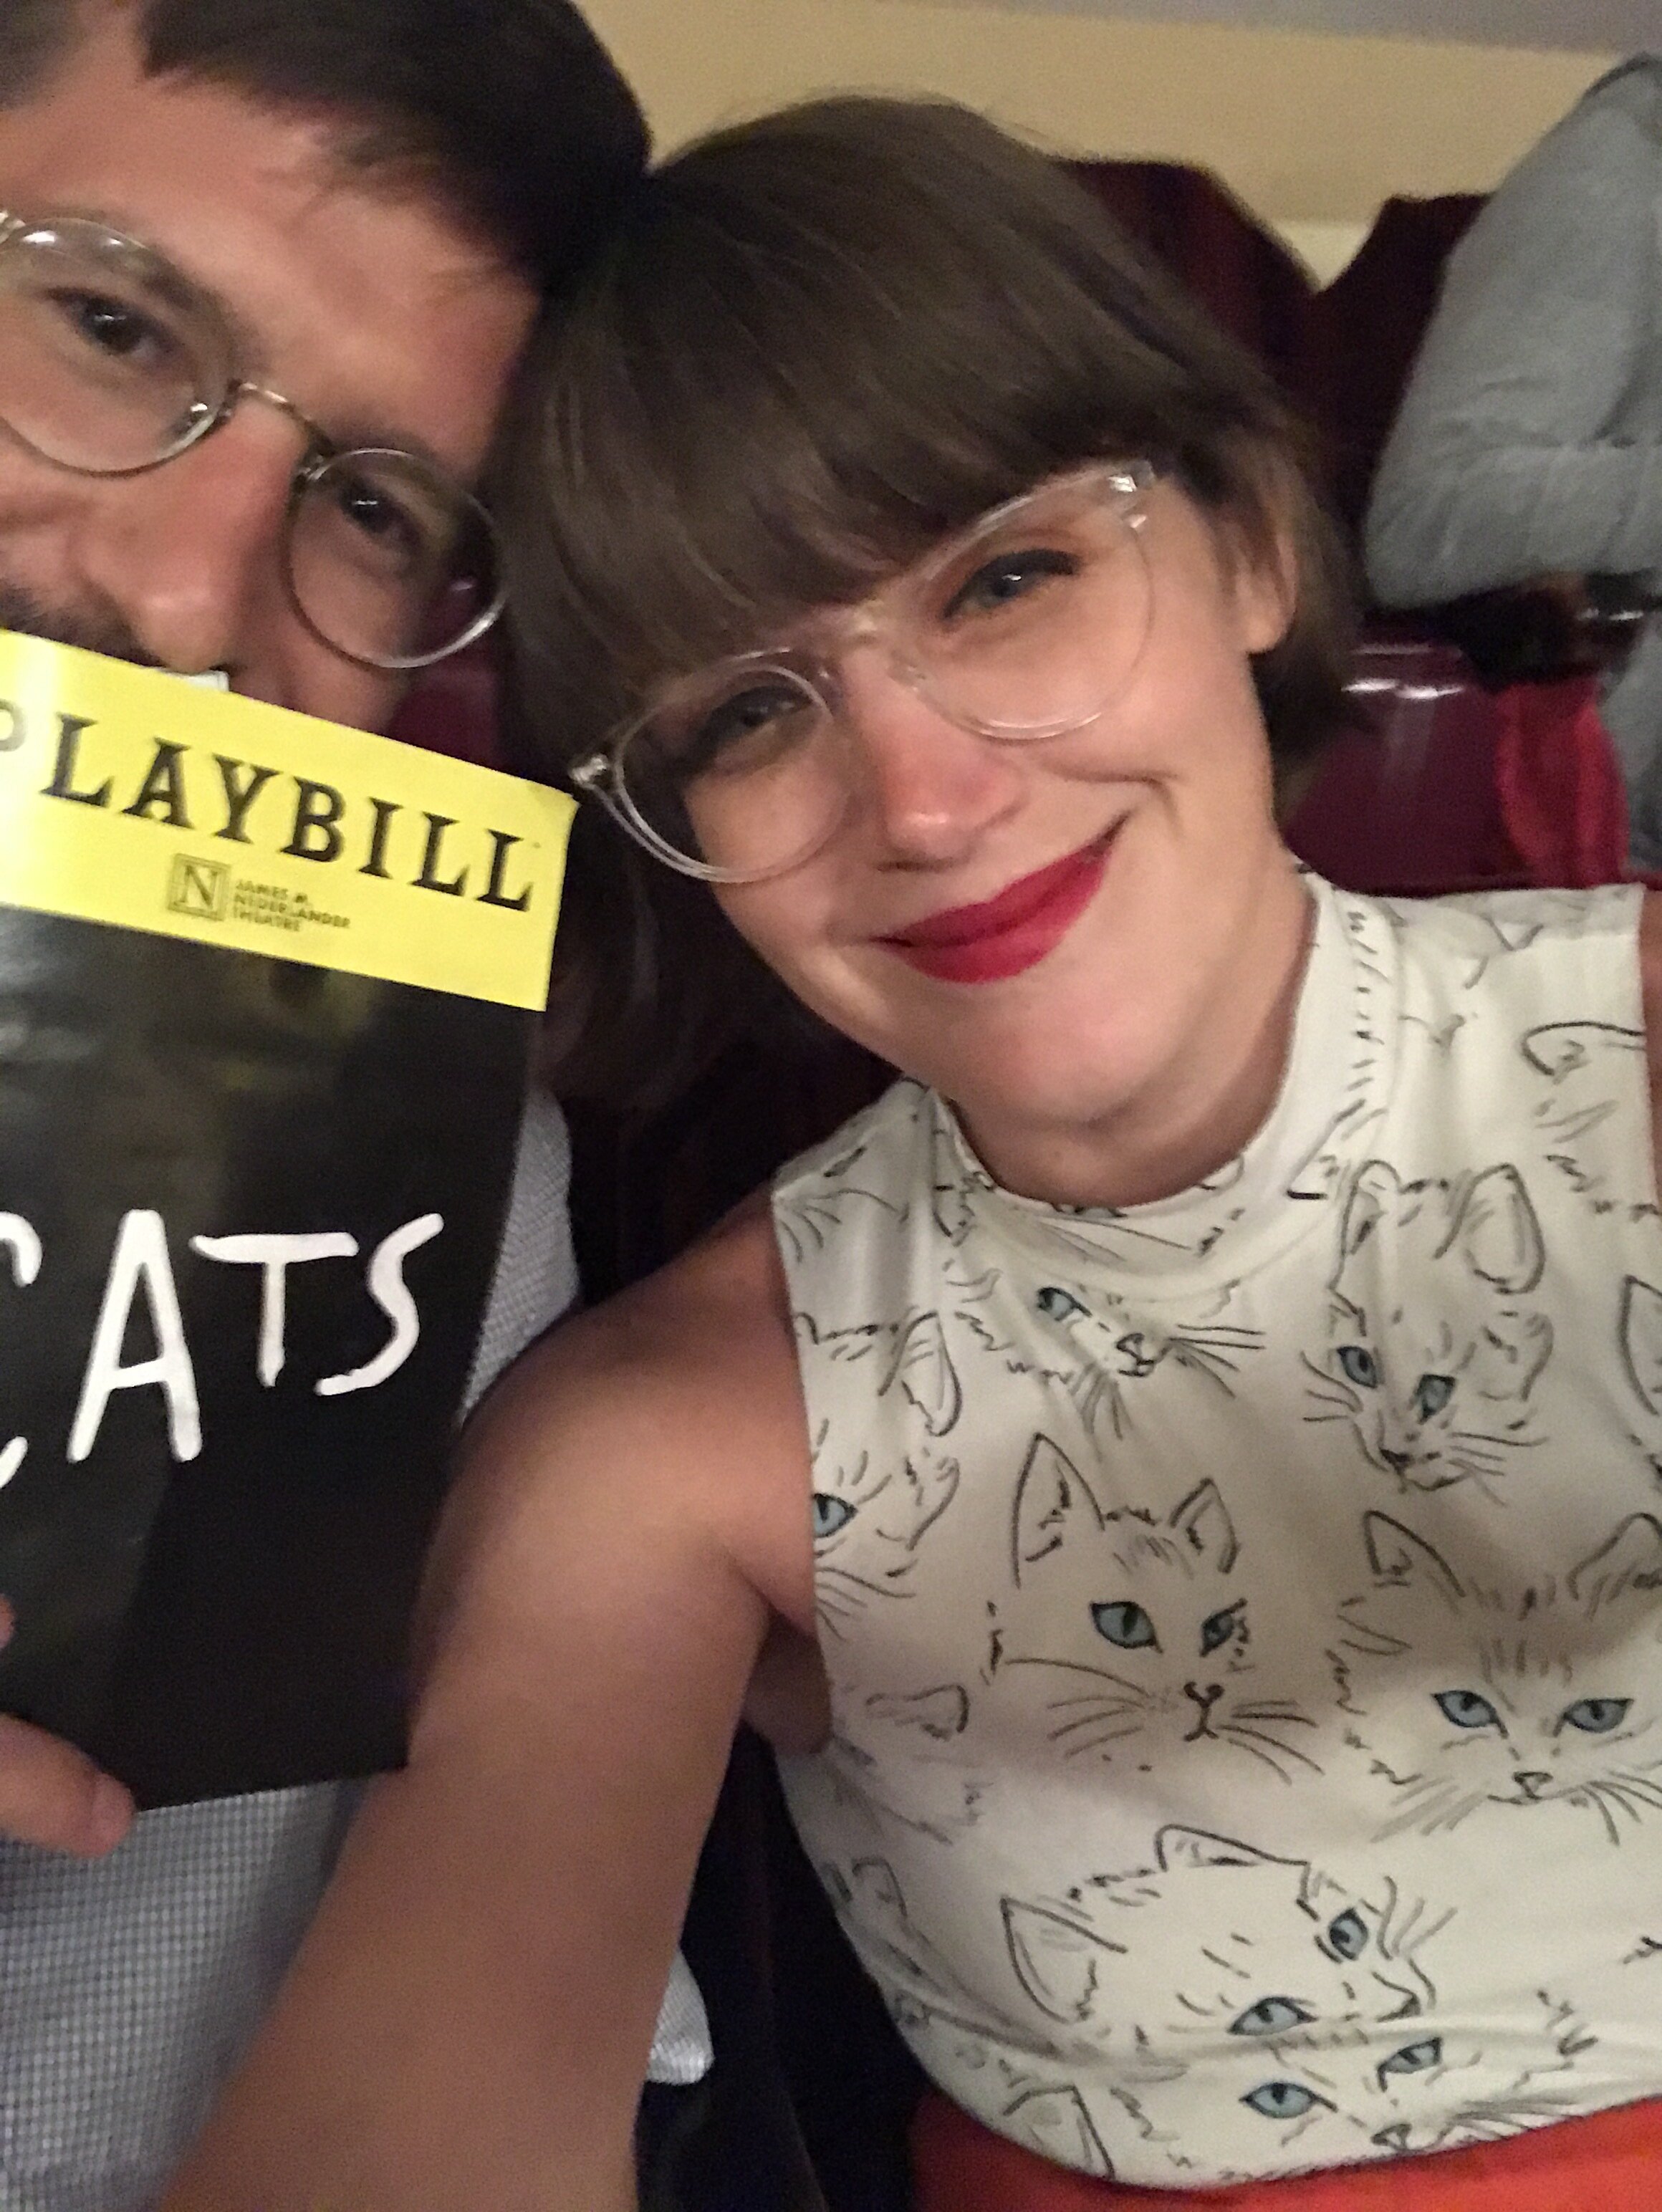  We non-ironically loved “Cats.” I saw it once sober and once high, and it was the exact same experience either way, which is a serious compliment.  